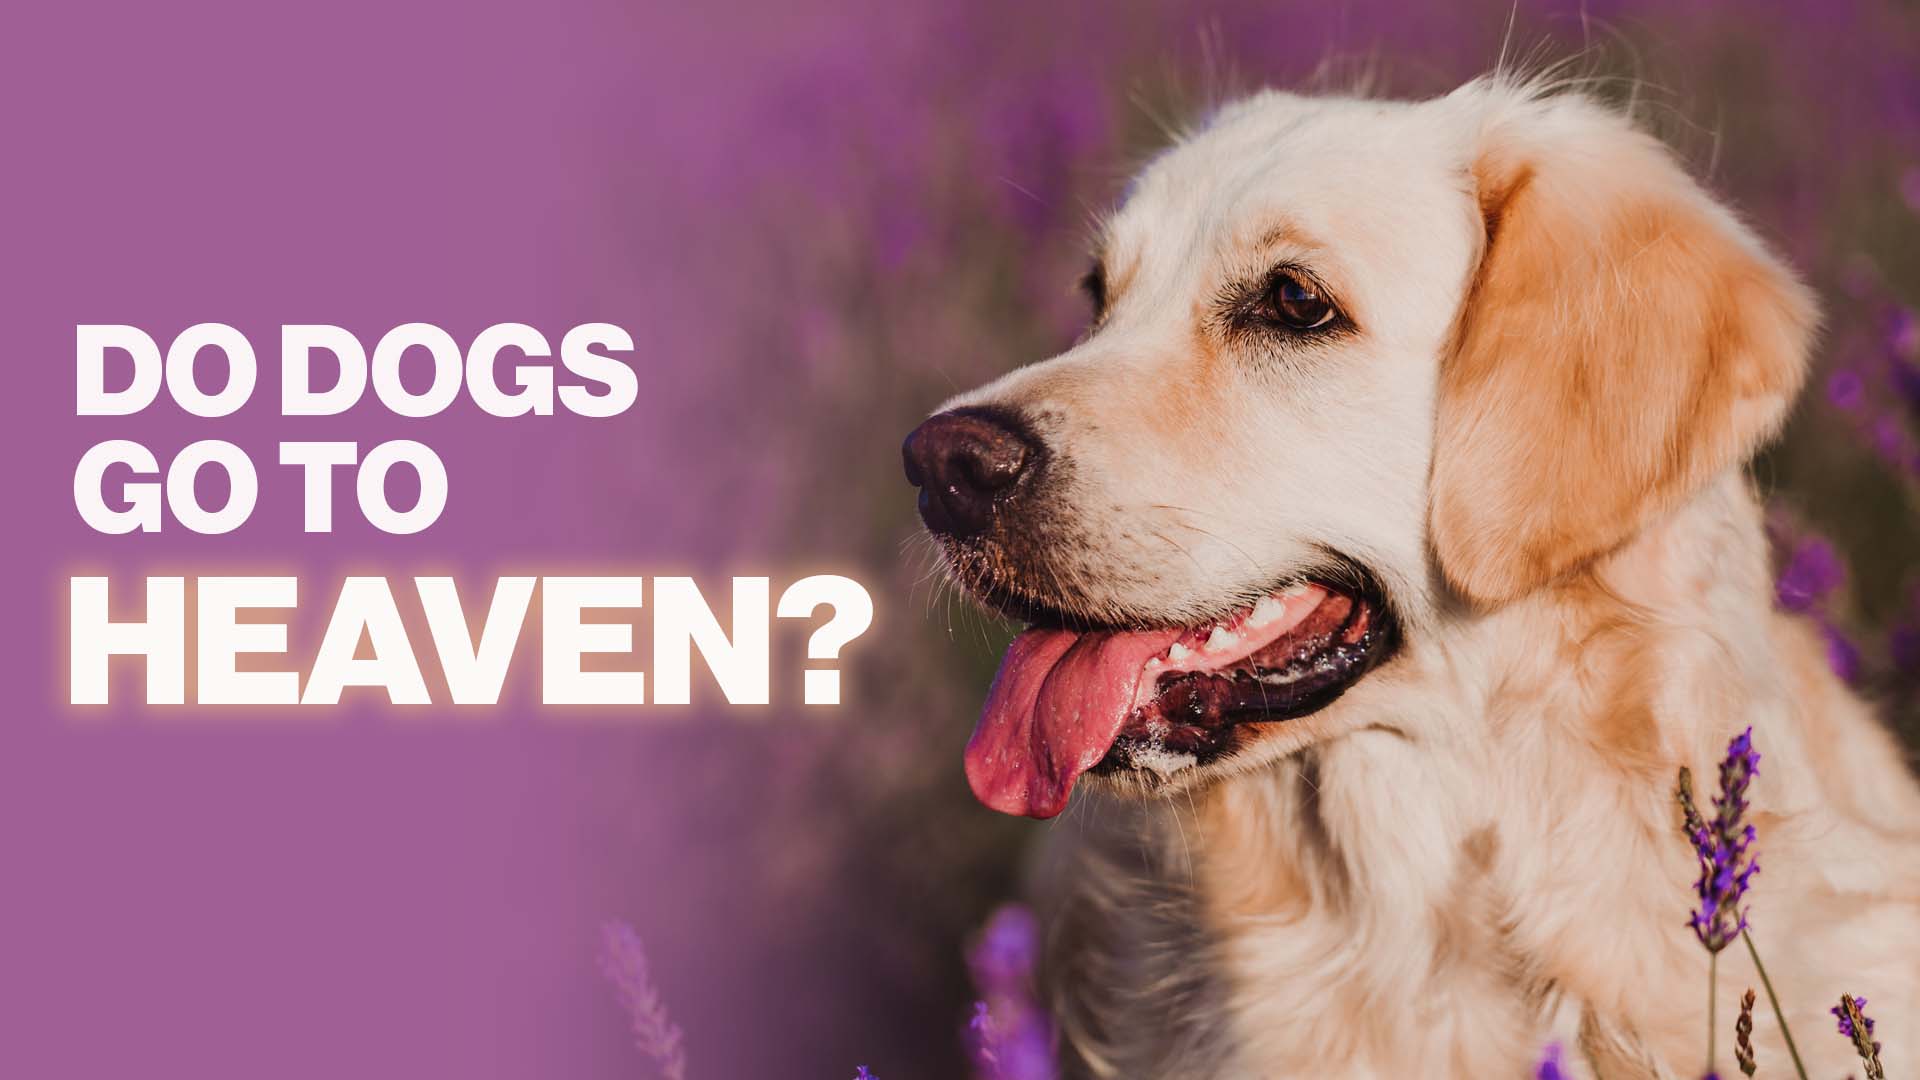 Will our pets be in heaven?